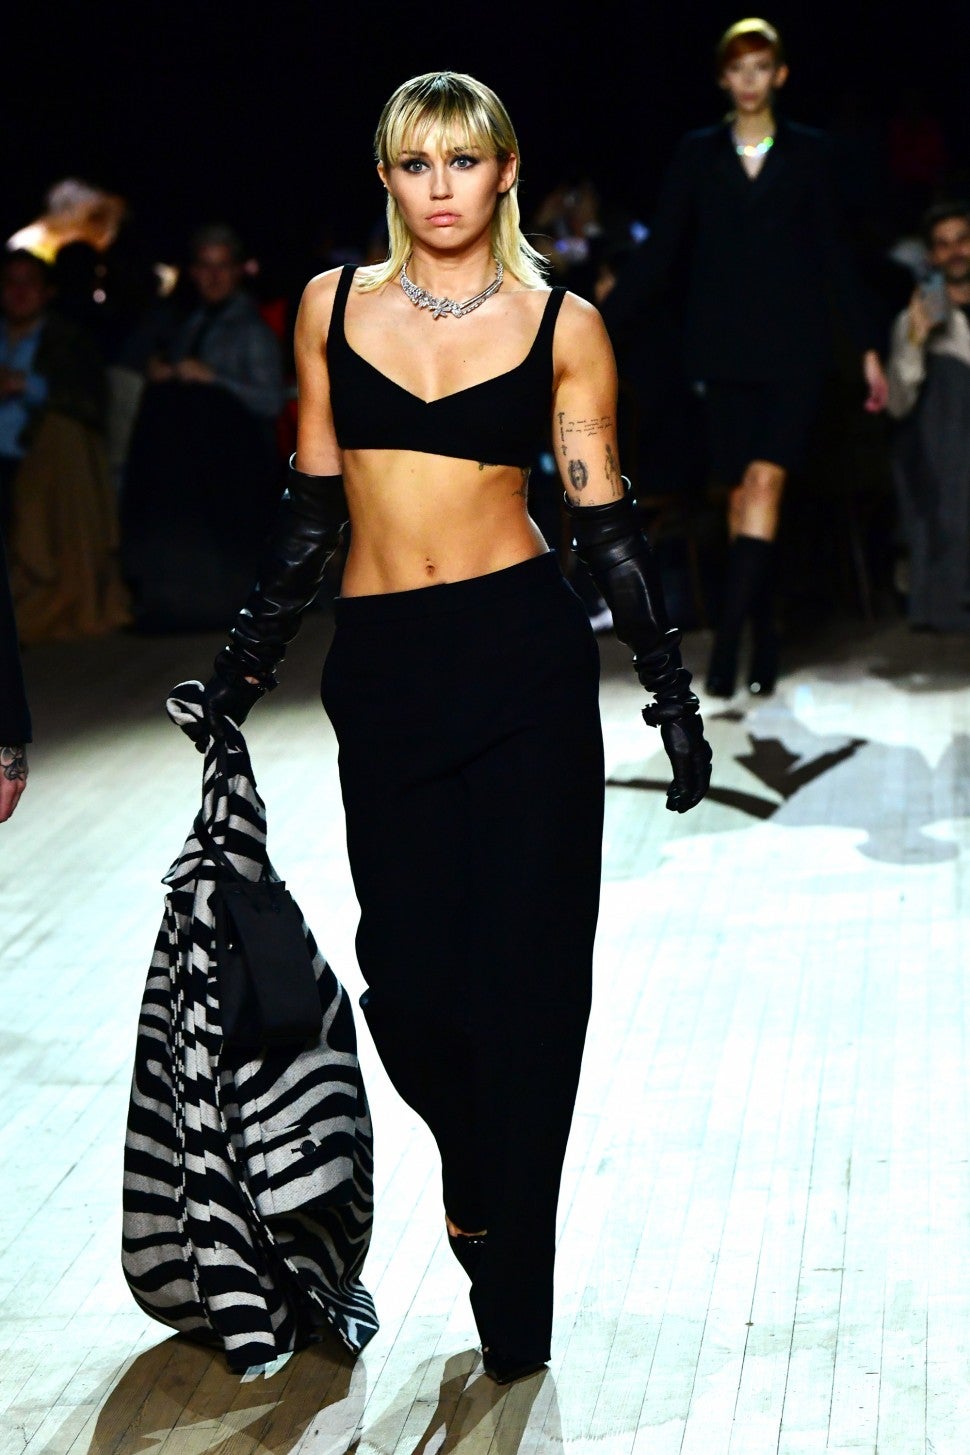 Miley Cyrus Shows Off Abs While Walking in Marc Jacobs Fashion Show